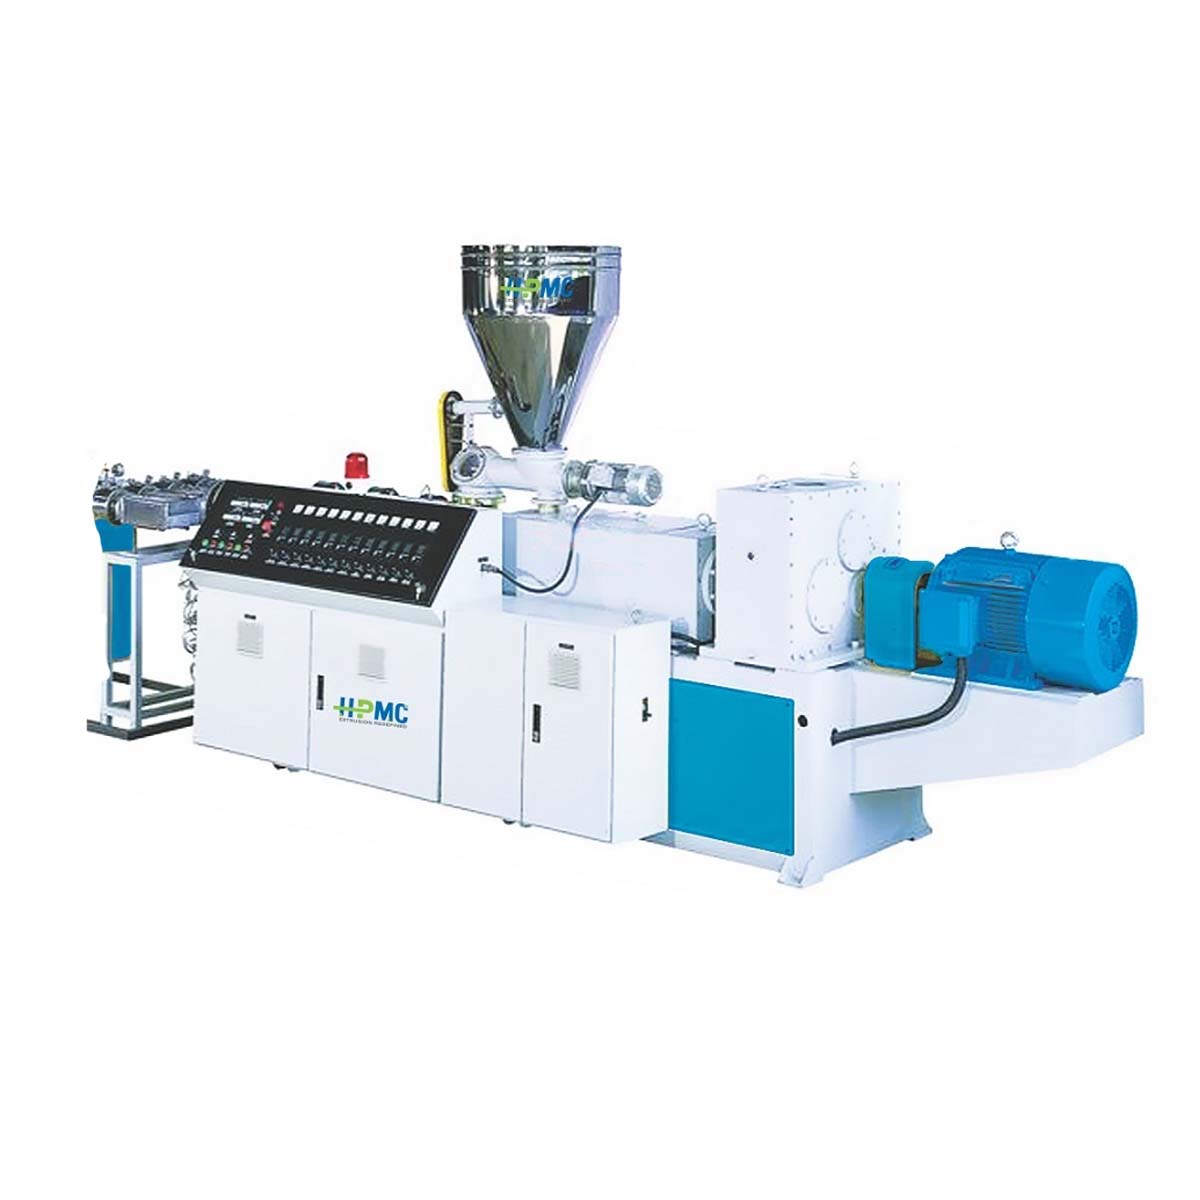 Twin Screw Extruder PVC Pipe Manufacturers, Suppliers and Exporters in Delhi